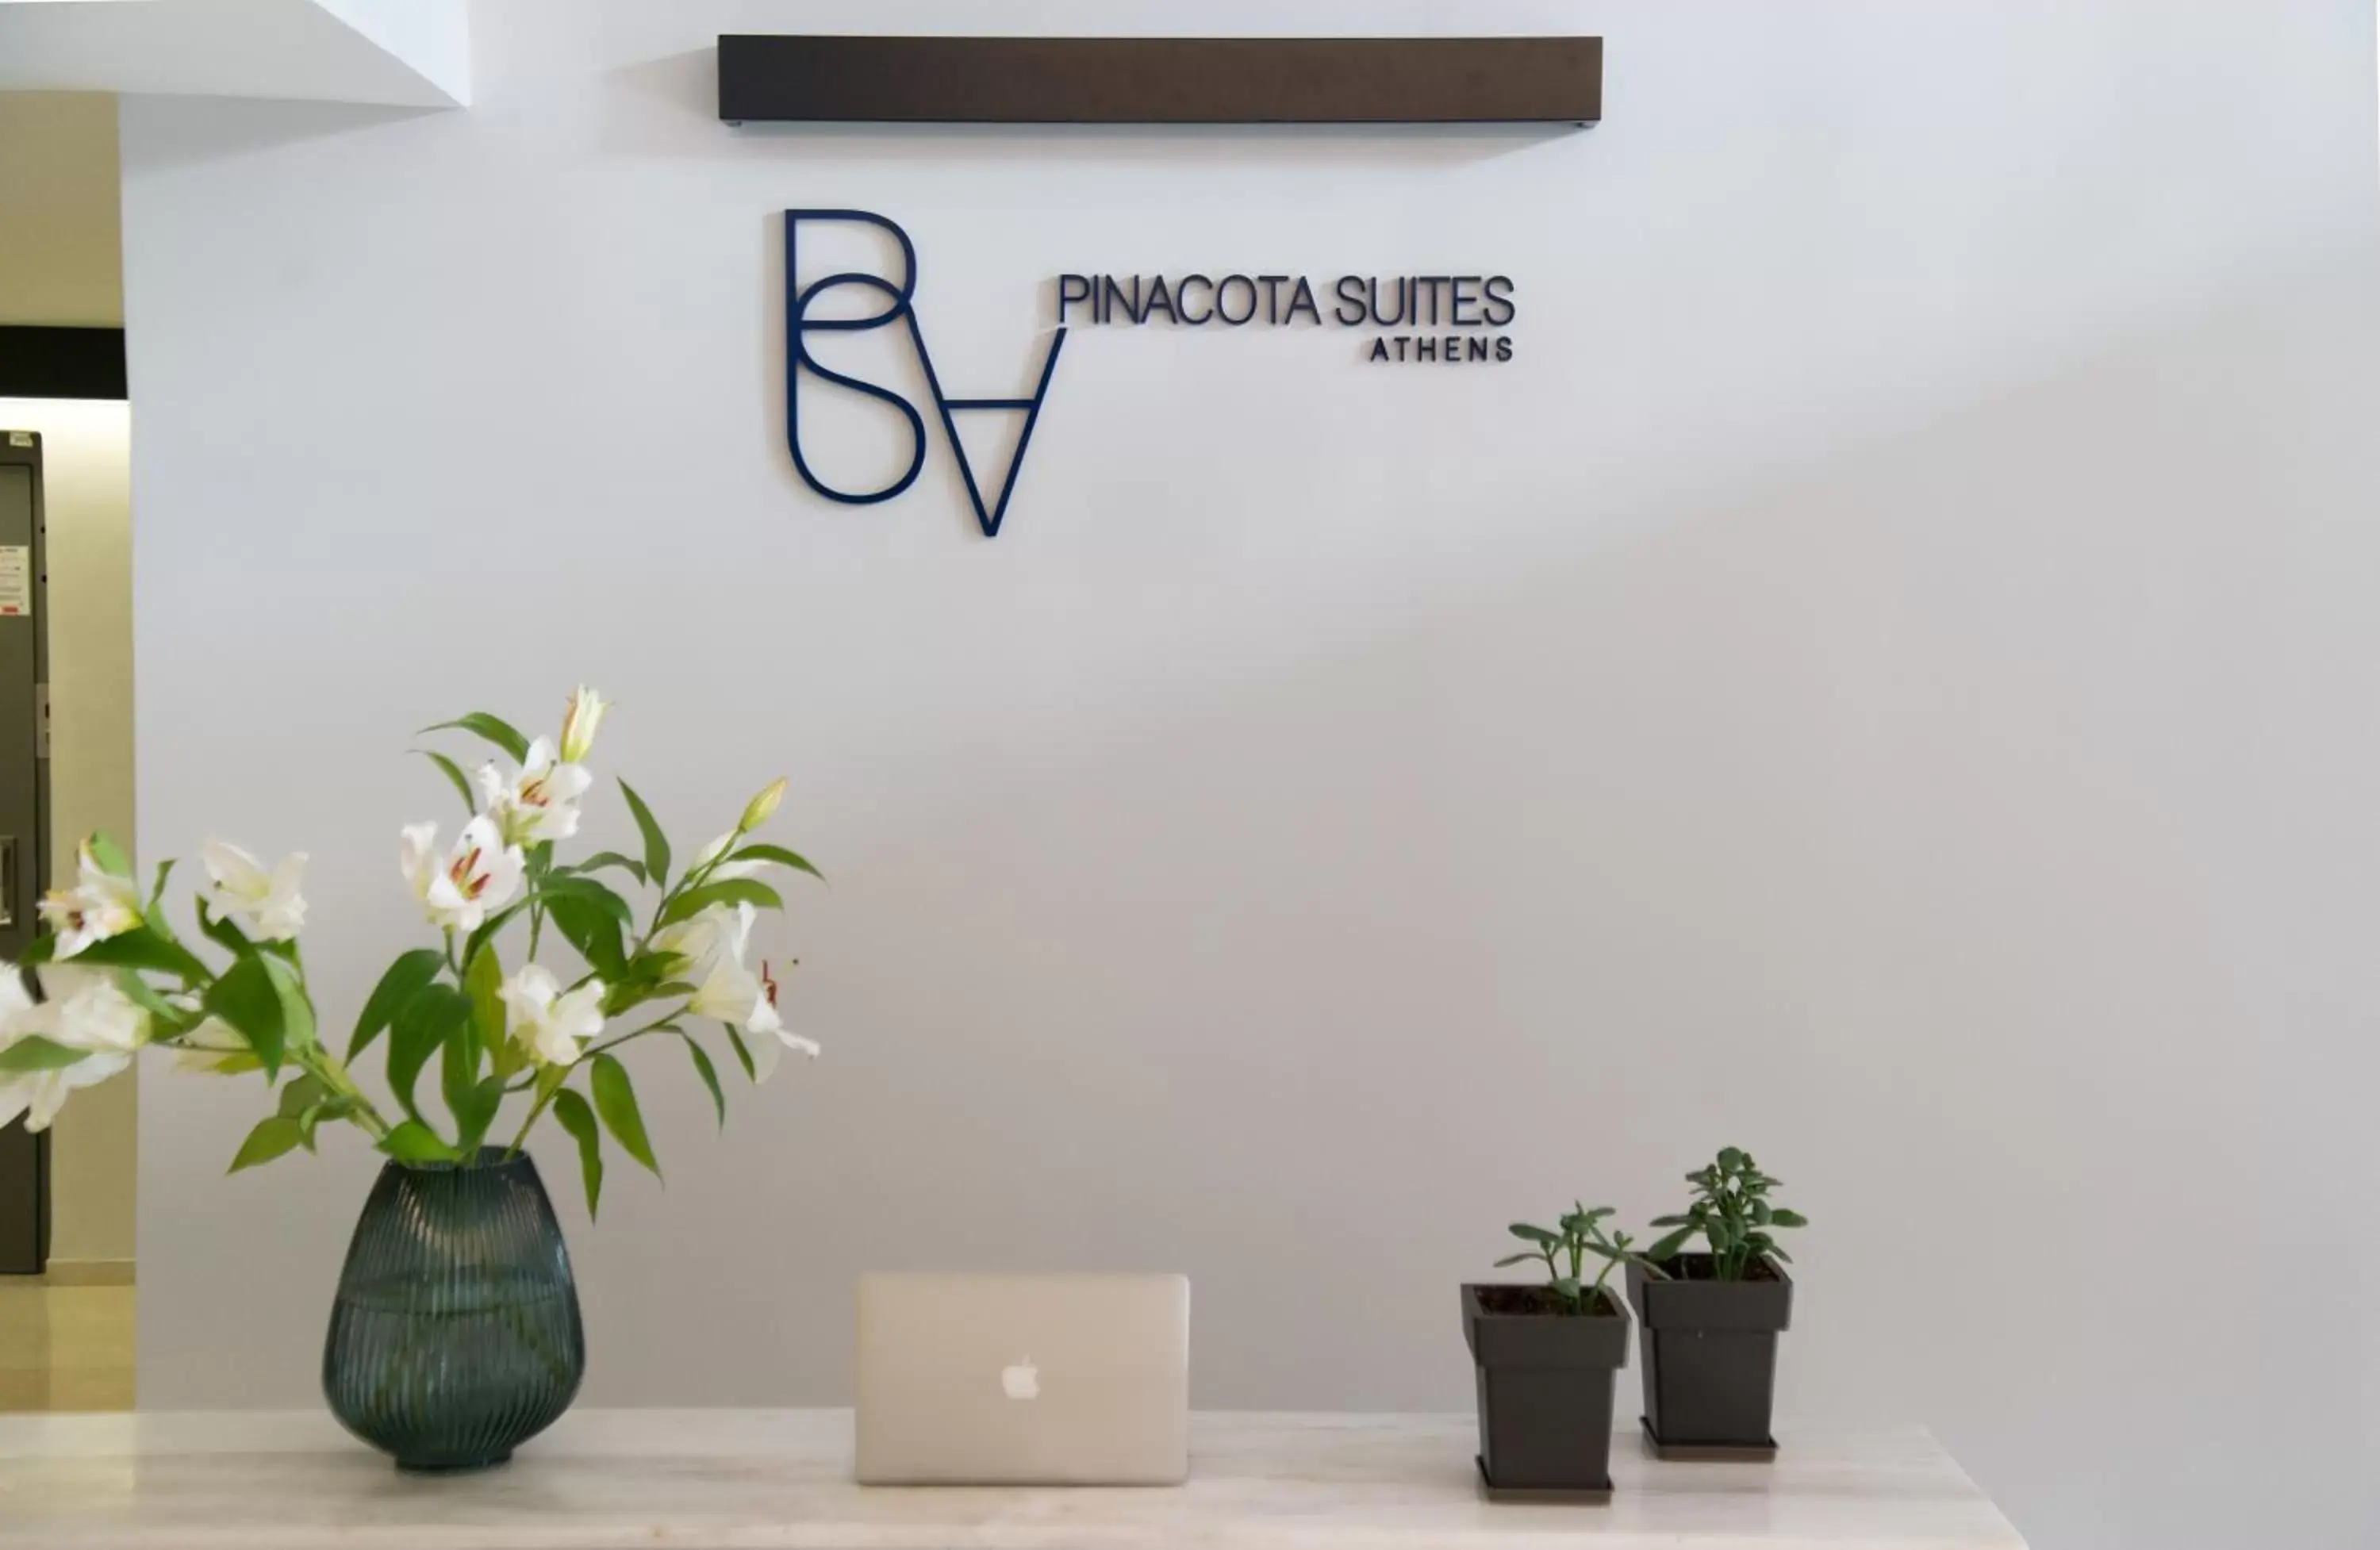 Property logo or sign in PINACOTA SUITES ATHENS